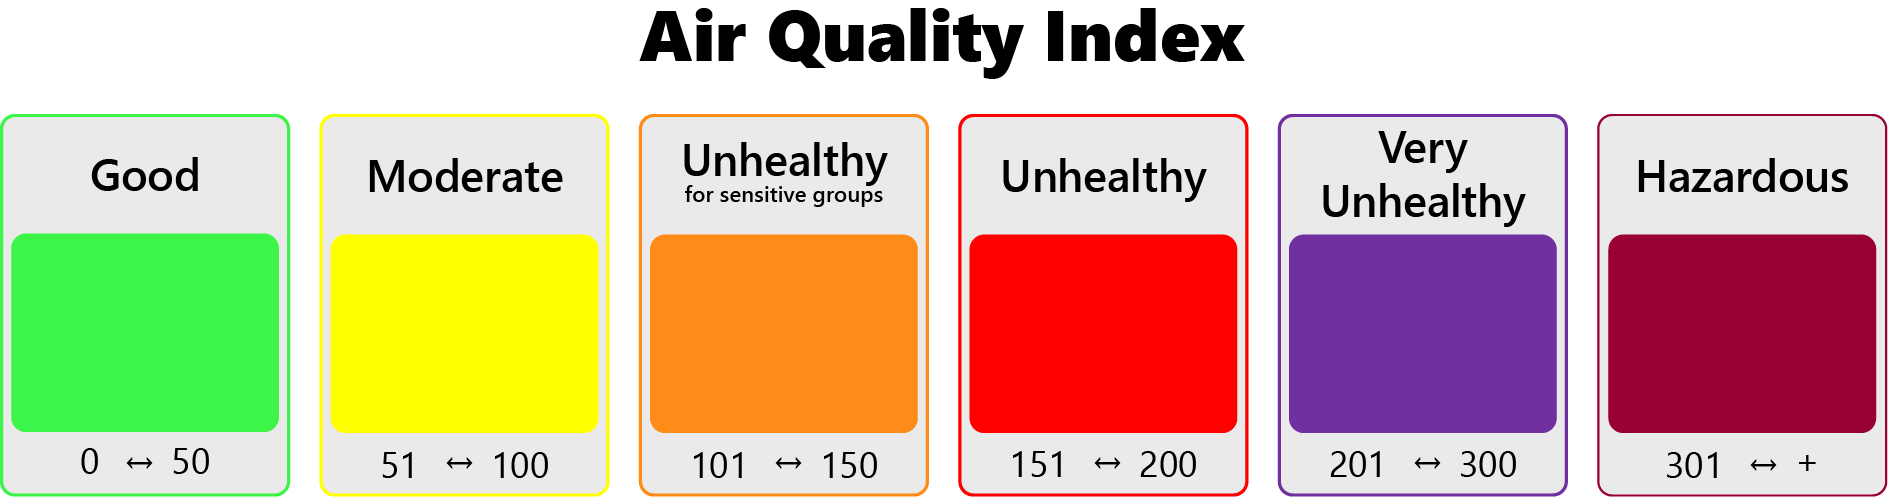 Air Quality Index color-coded scale